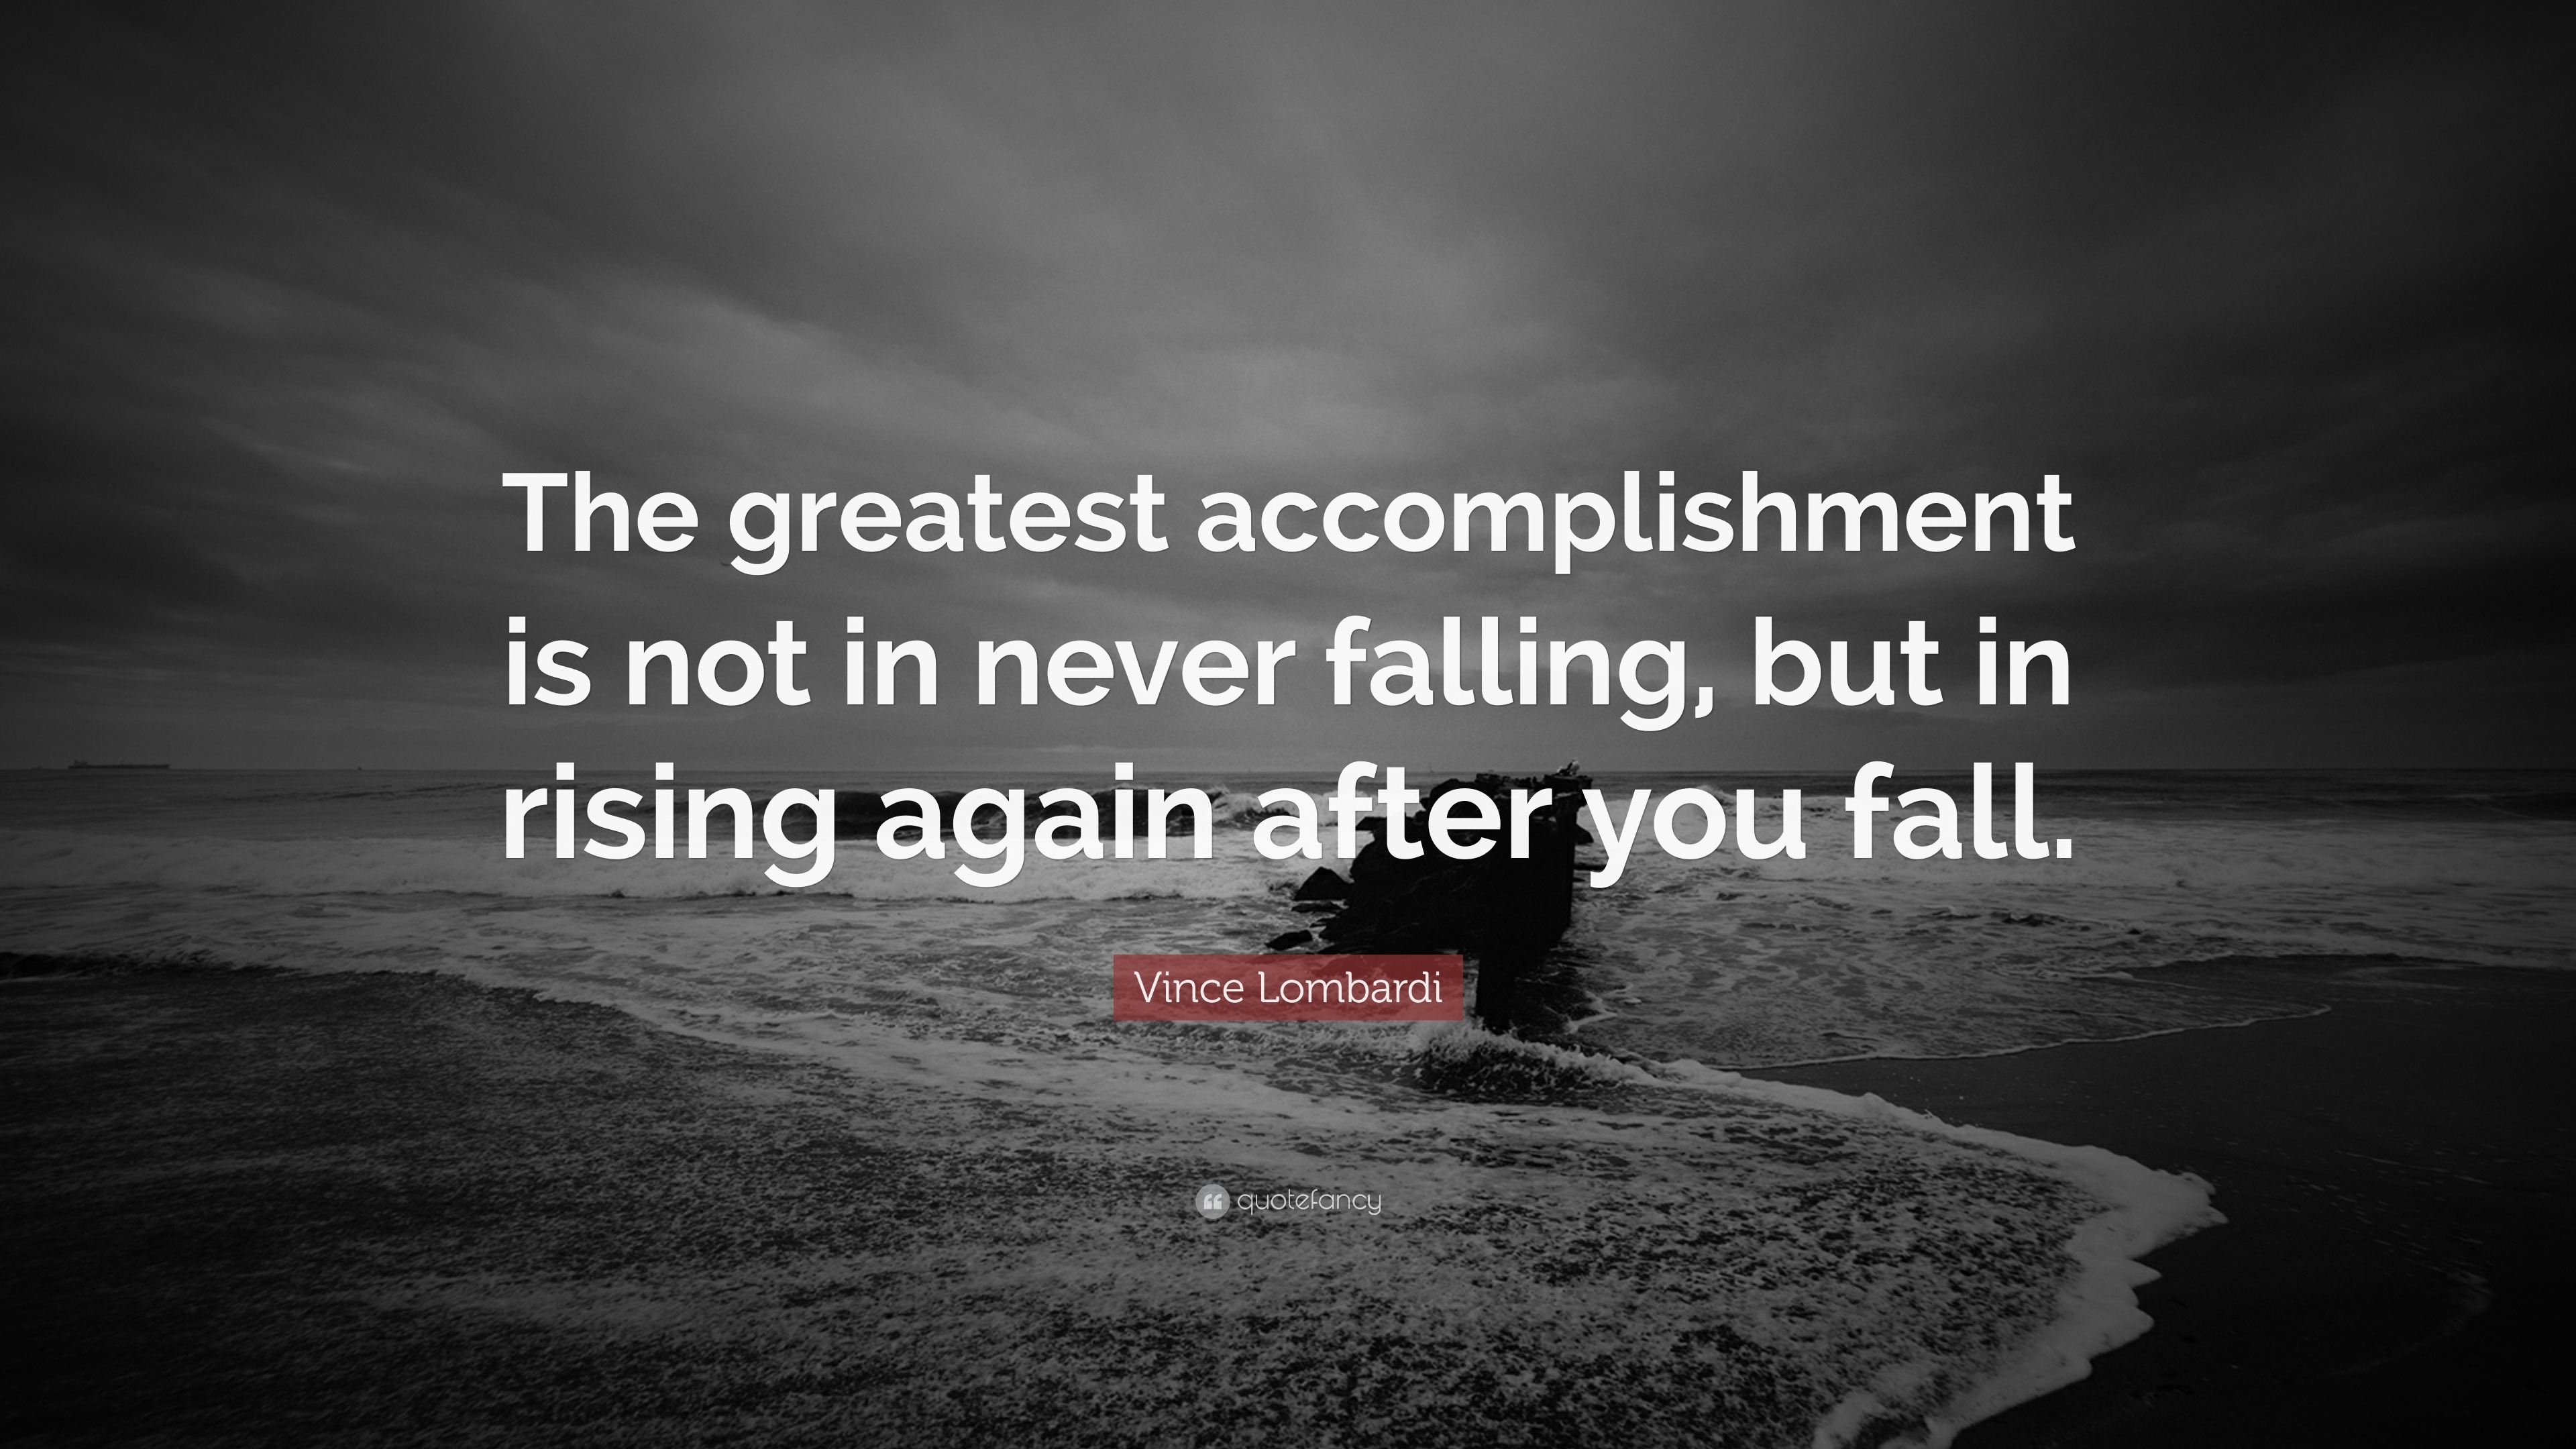 Vince Lombardi Quote: “The greatest accomplishment is not in never